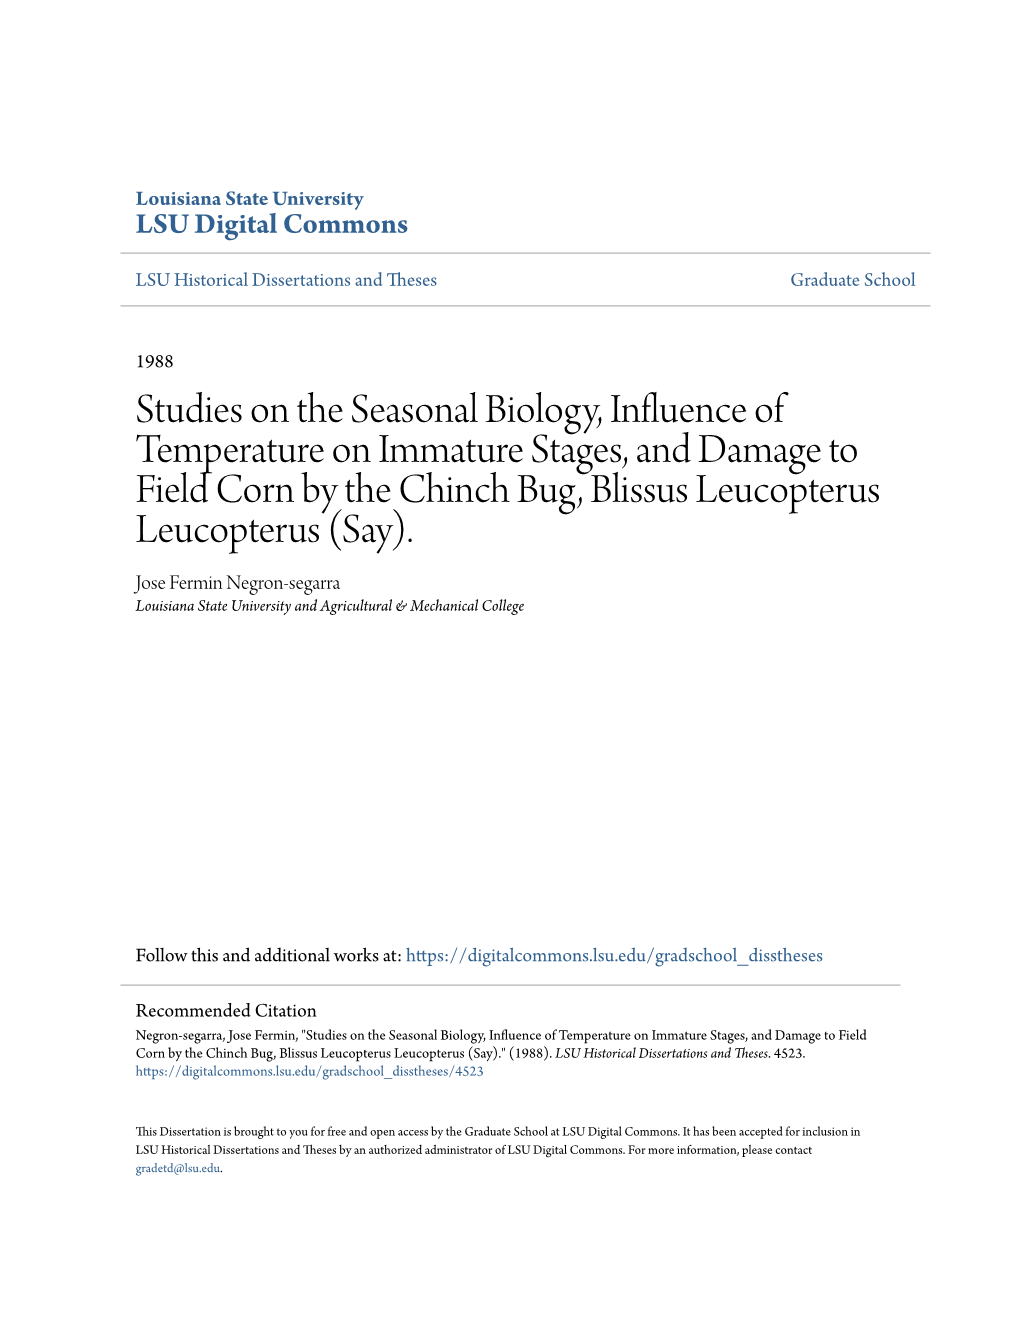 Studies on the Seasonal Biology, Influence of Temperature on Immature Stages, and Damage to Field Corn by the Chinch Bug, Blissus Leucopterus Leucopterus (Say)